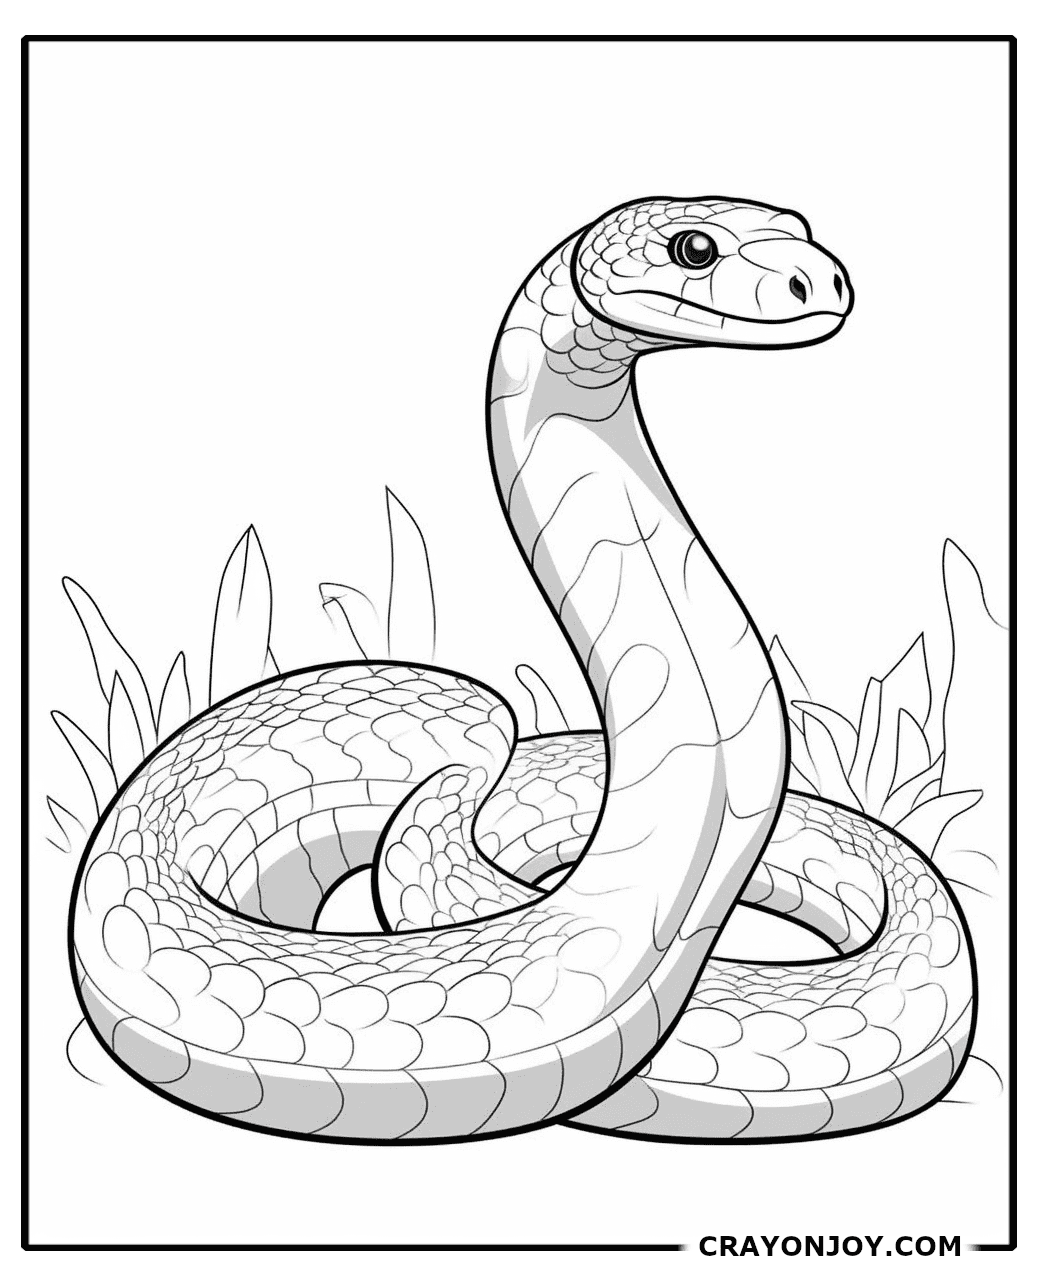 Anaconda Coloring Pages: Free Printable Sheets for Kids and Adults